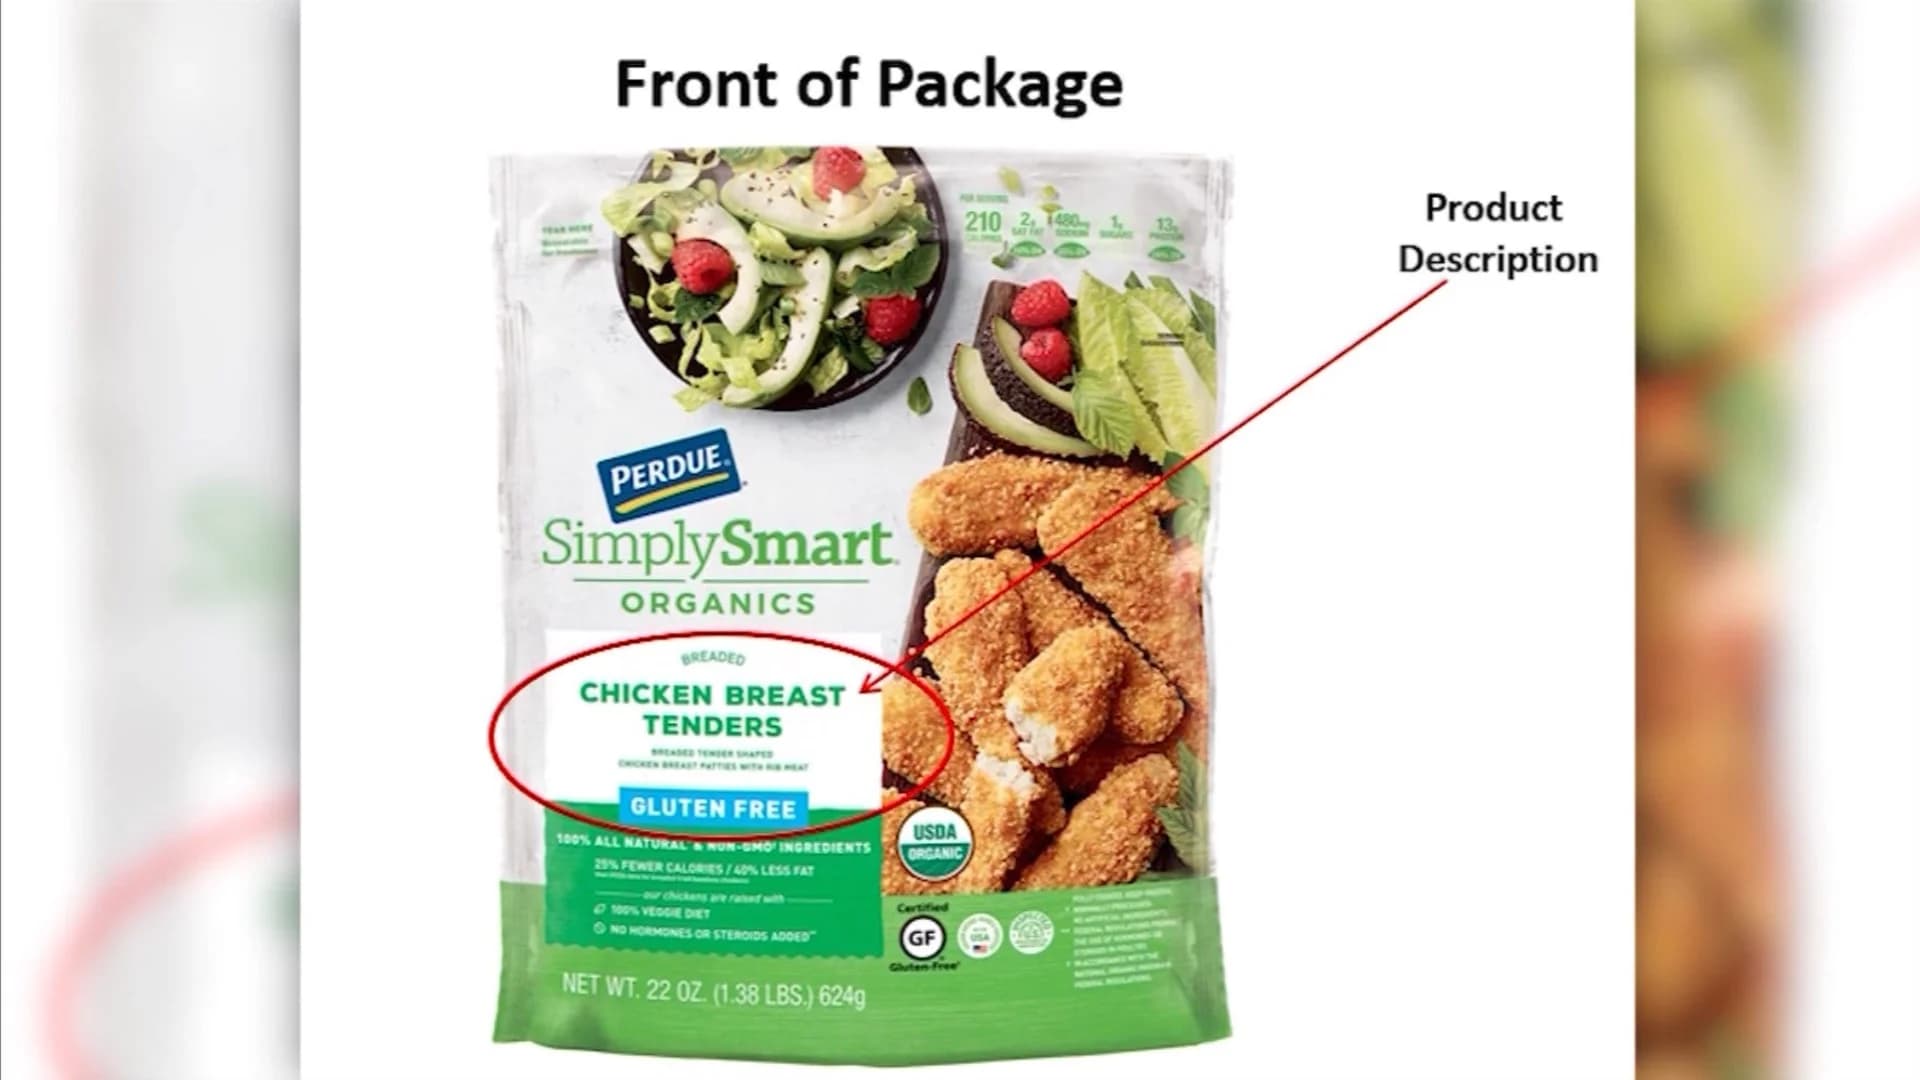 Check your freezers – Perdue recalls around 495 pounds of chicken